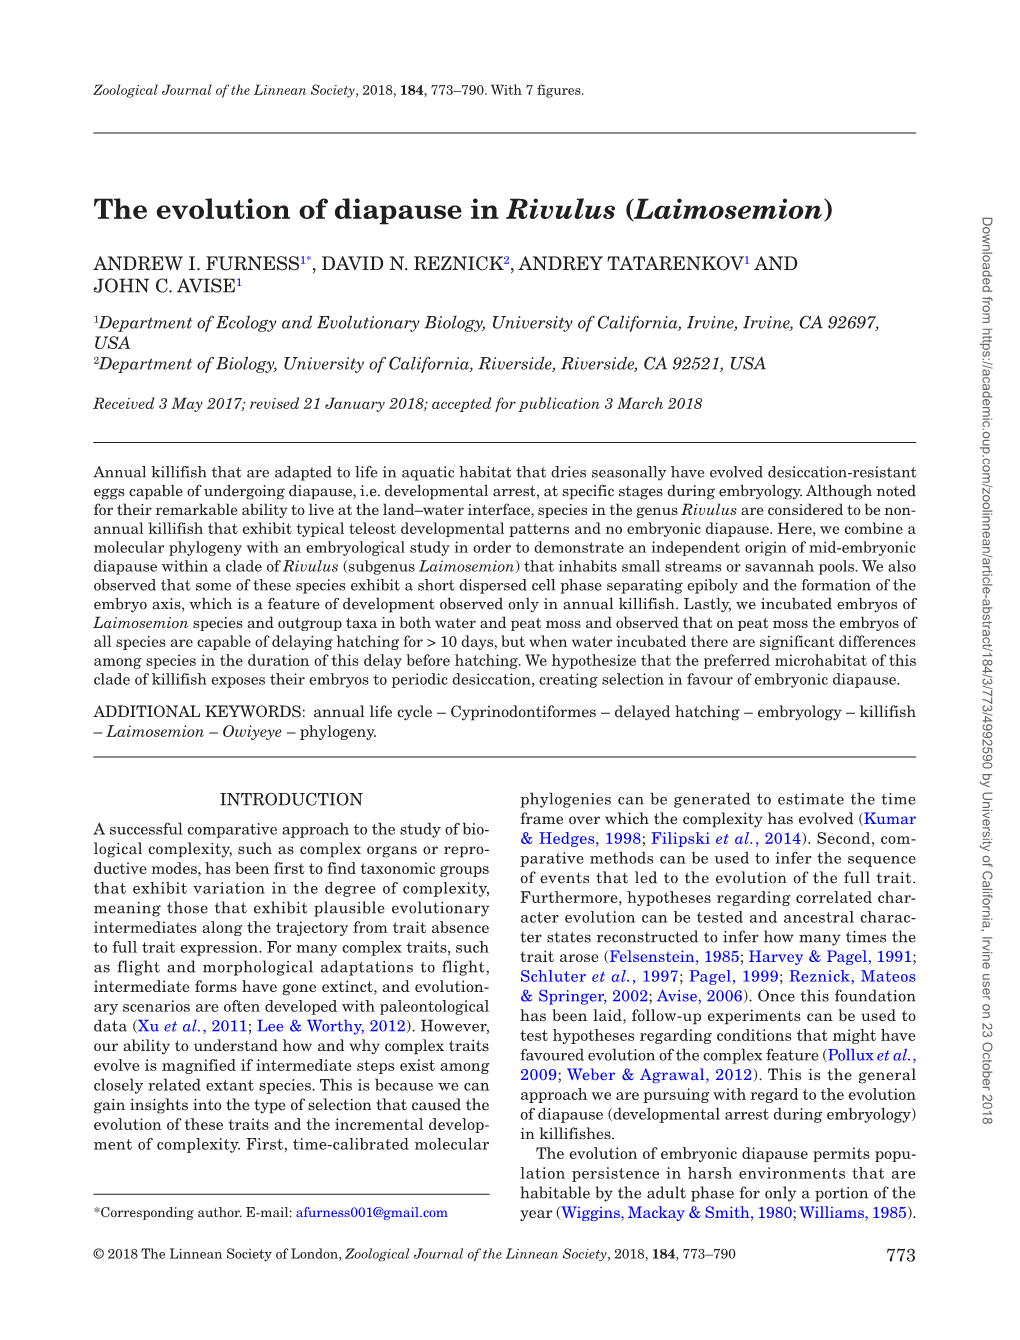 The Evolution of Diapause in Rivulus (Laimosemion)